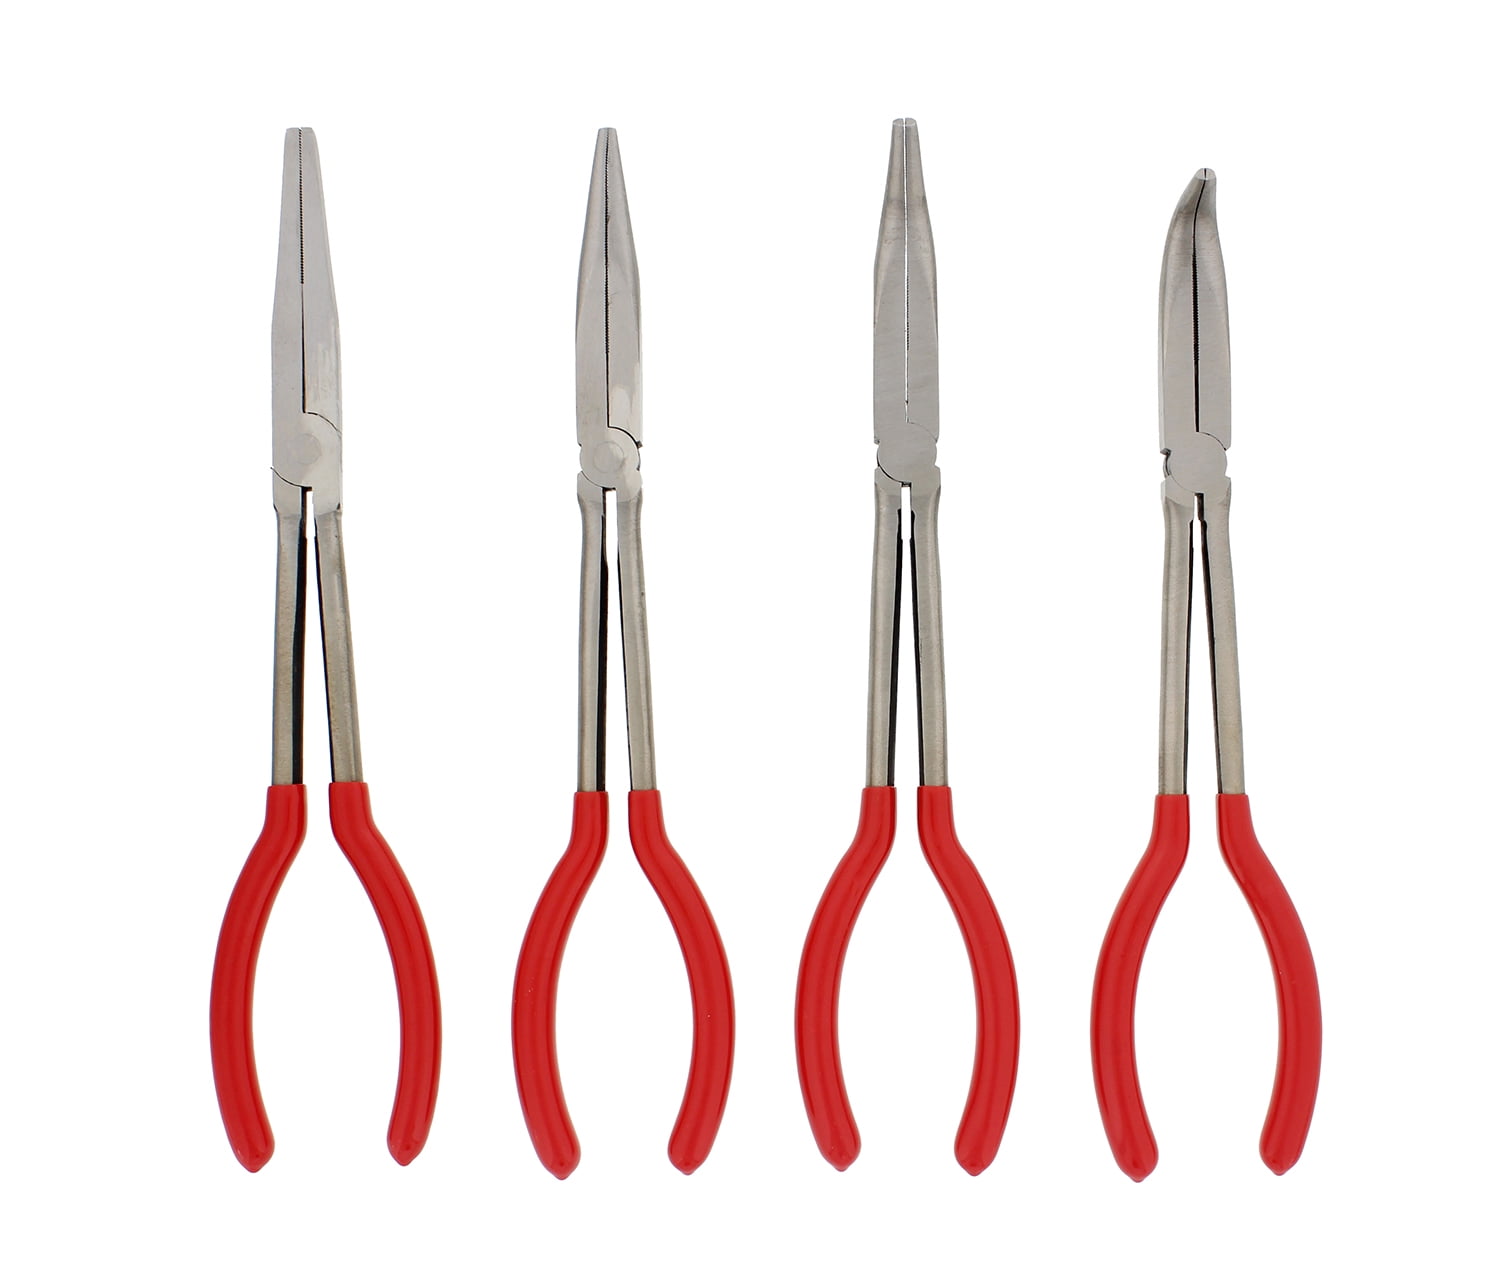 ABN Long Reach Pliers 4-Piece Set - Angled Curved Straight and Duckbill 